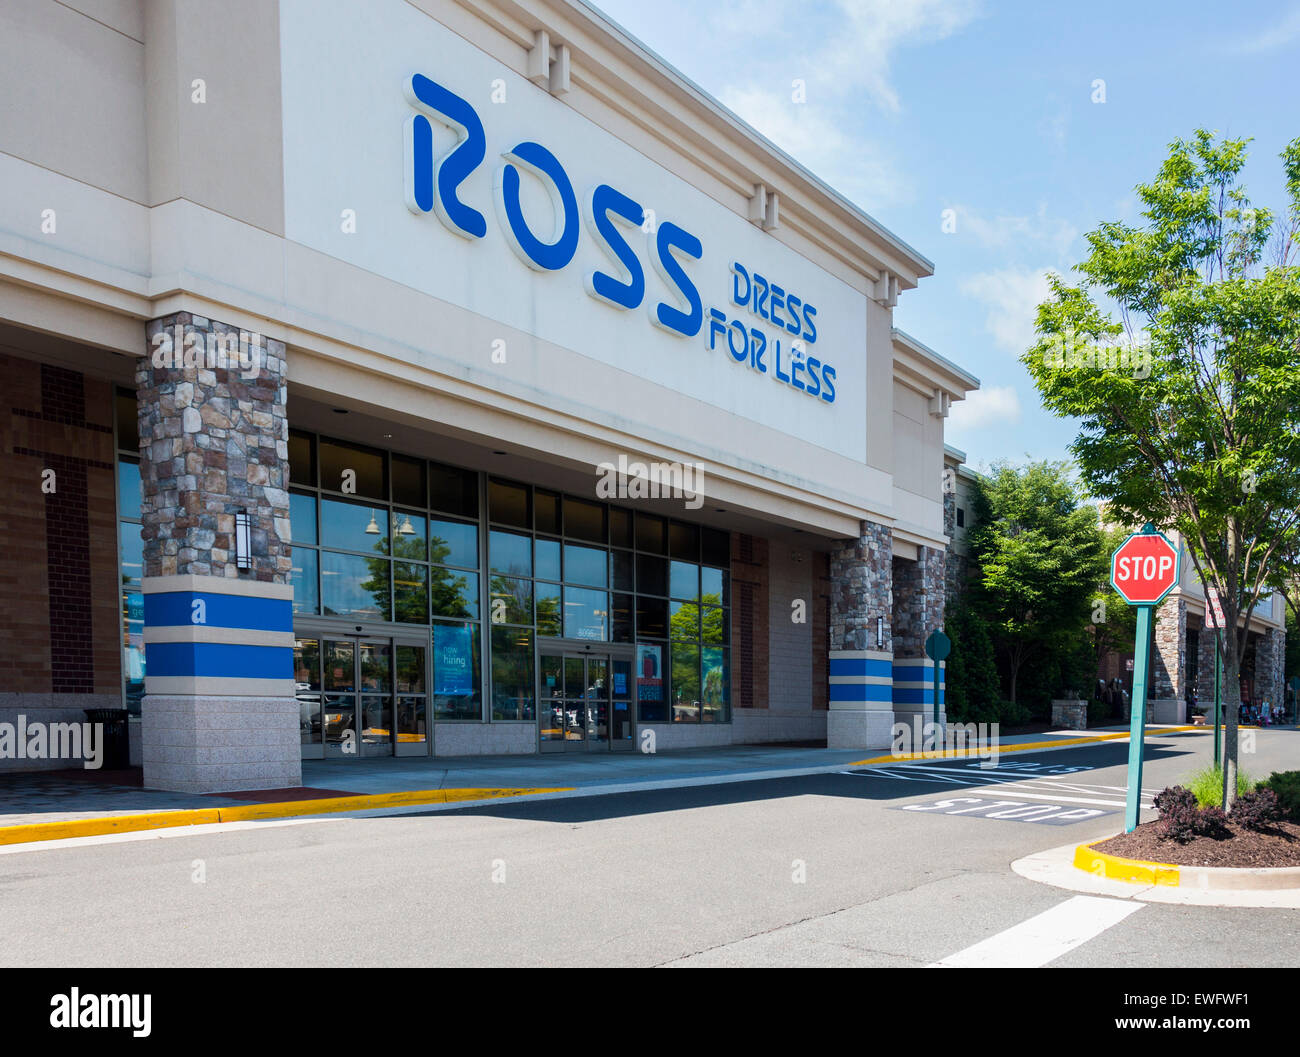 Entrance to large Ross superstore in Gainesville, Virginia, USA Stock Photo